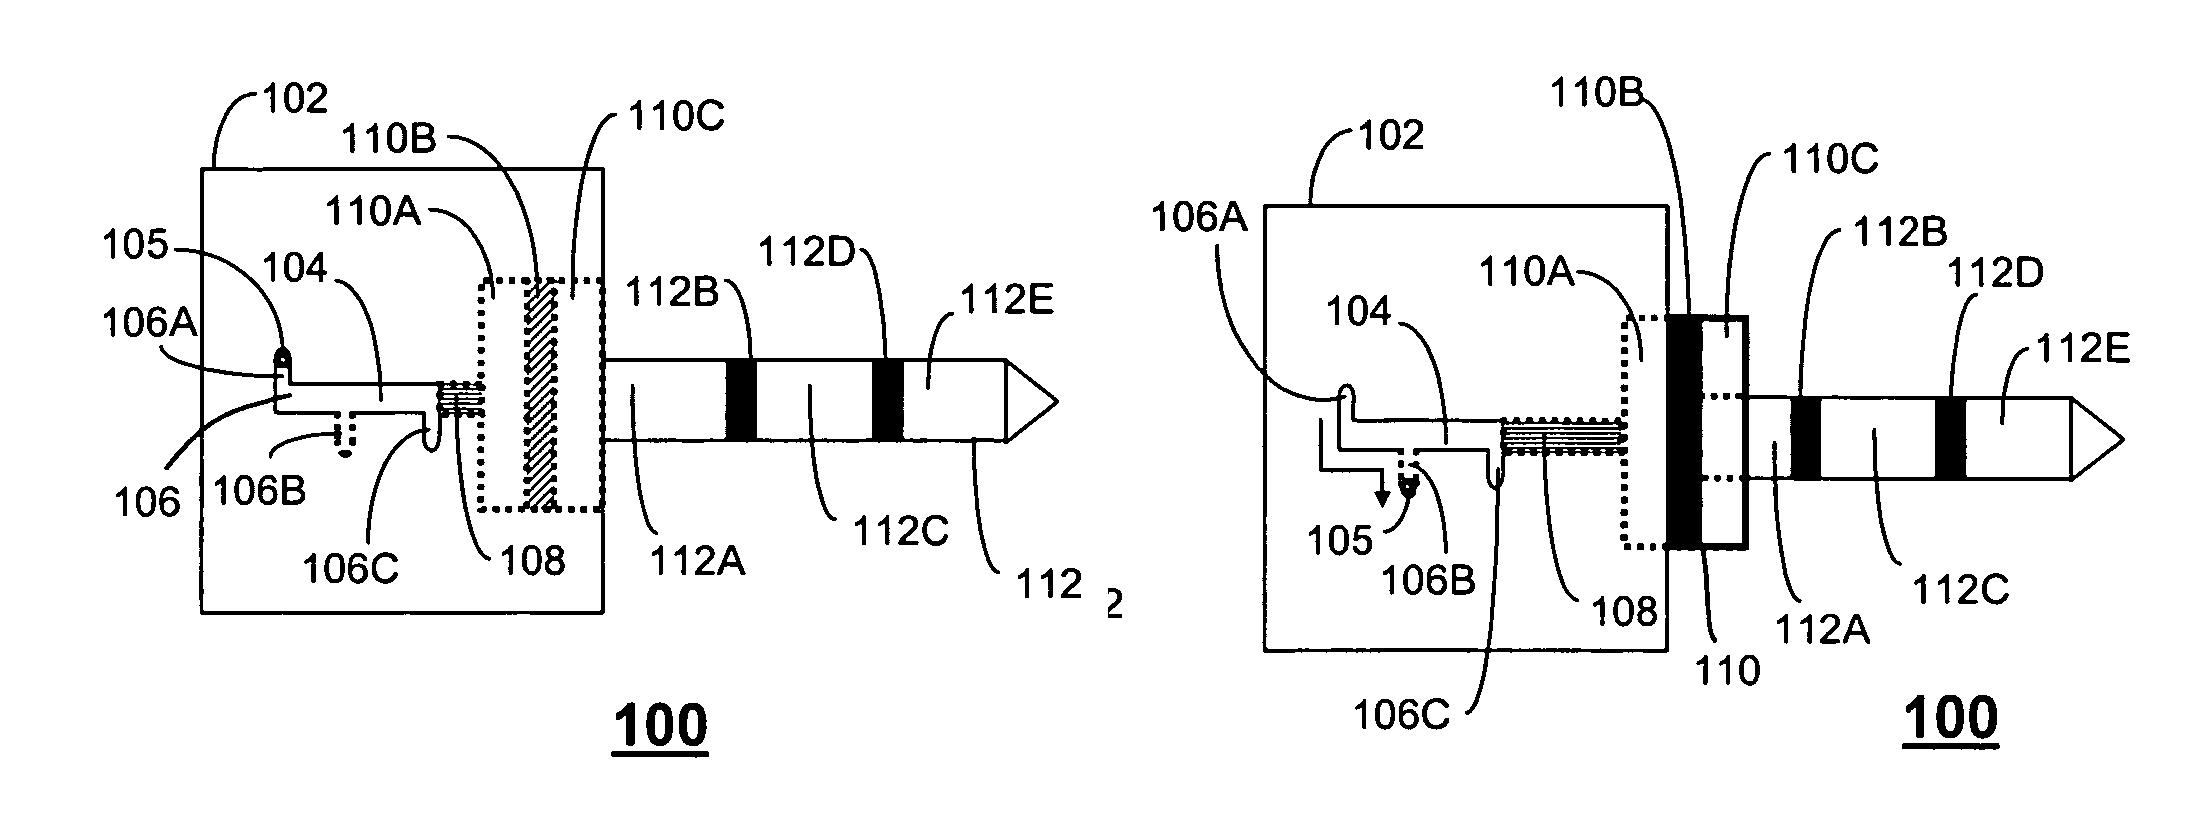 Apparatus for altering poles on an accessory